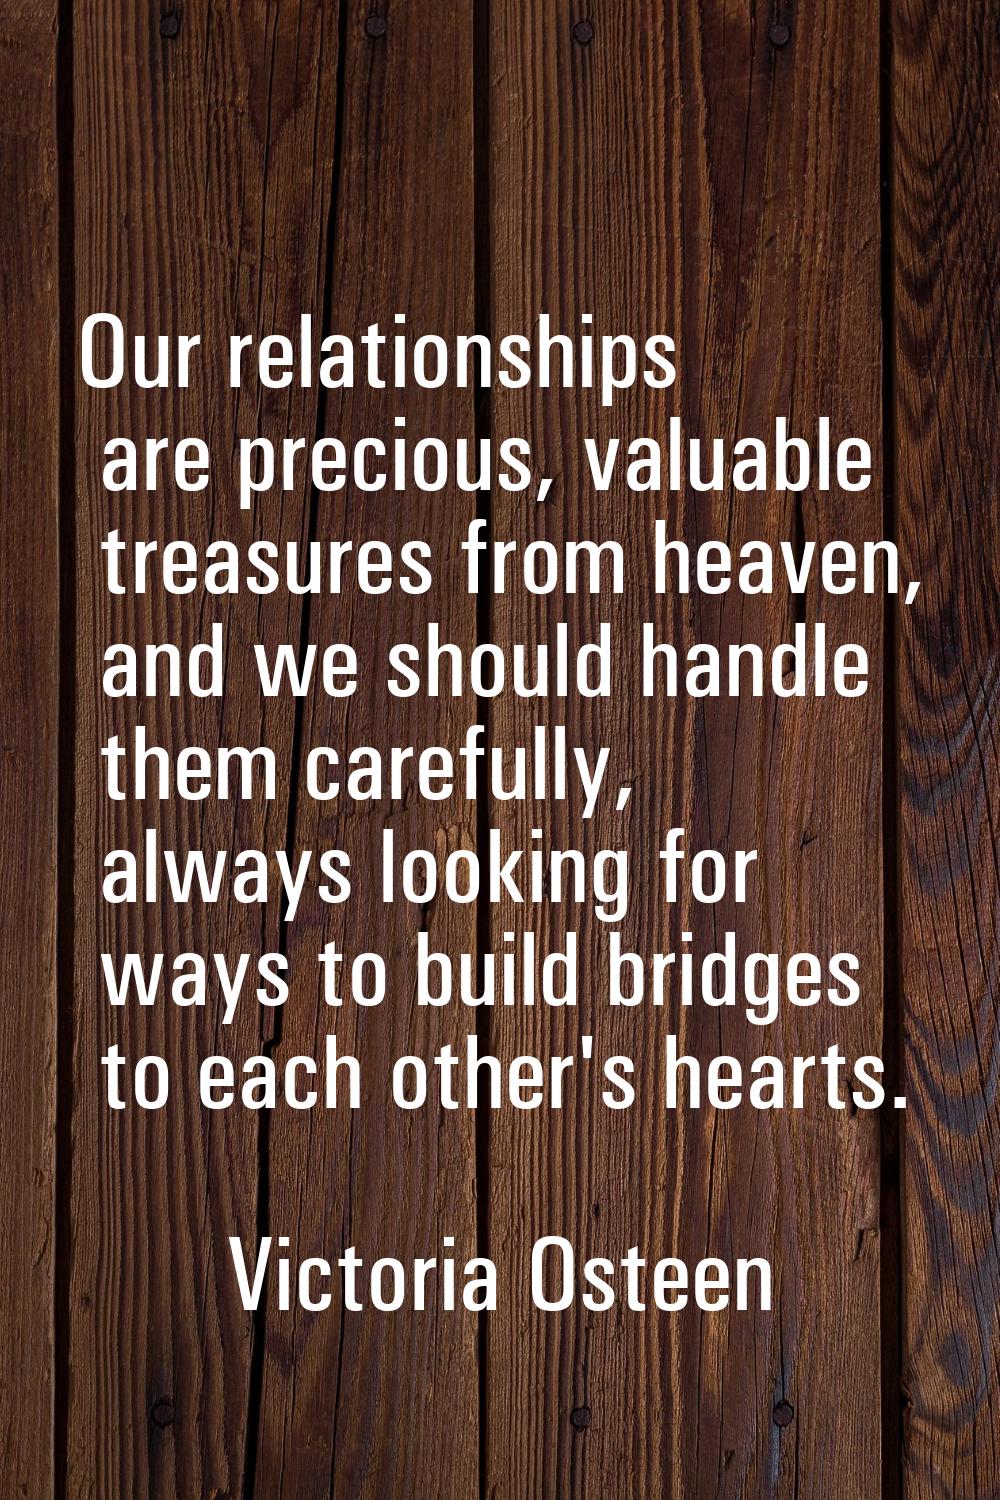 Our relationships are precious, valuable treasures from heaven, and we should handle them carefully